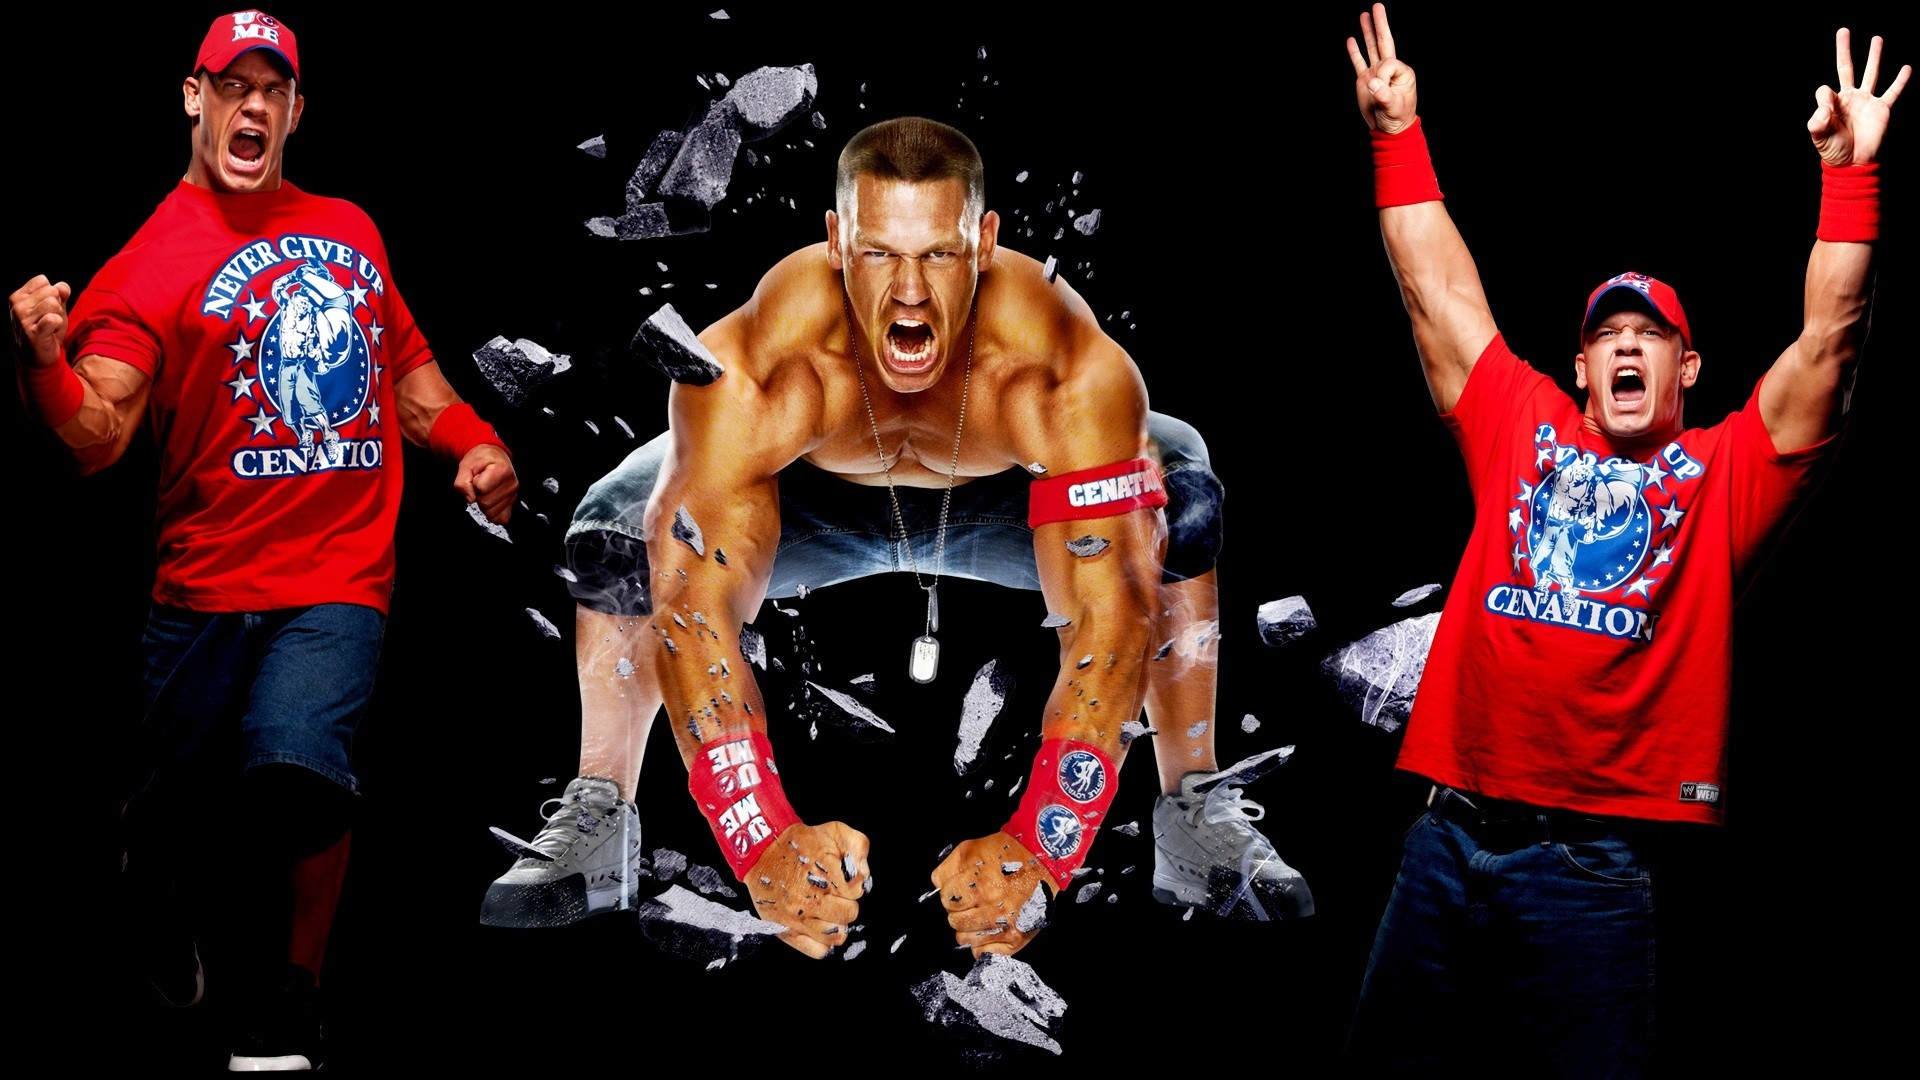 1920x1080 WWE HD Wallpapers for Desktop, iPhone, iPad, and Android